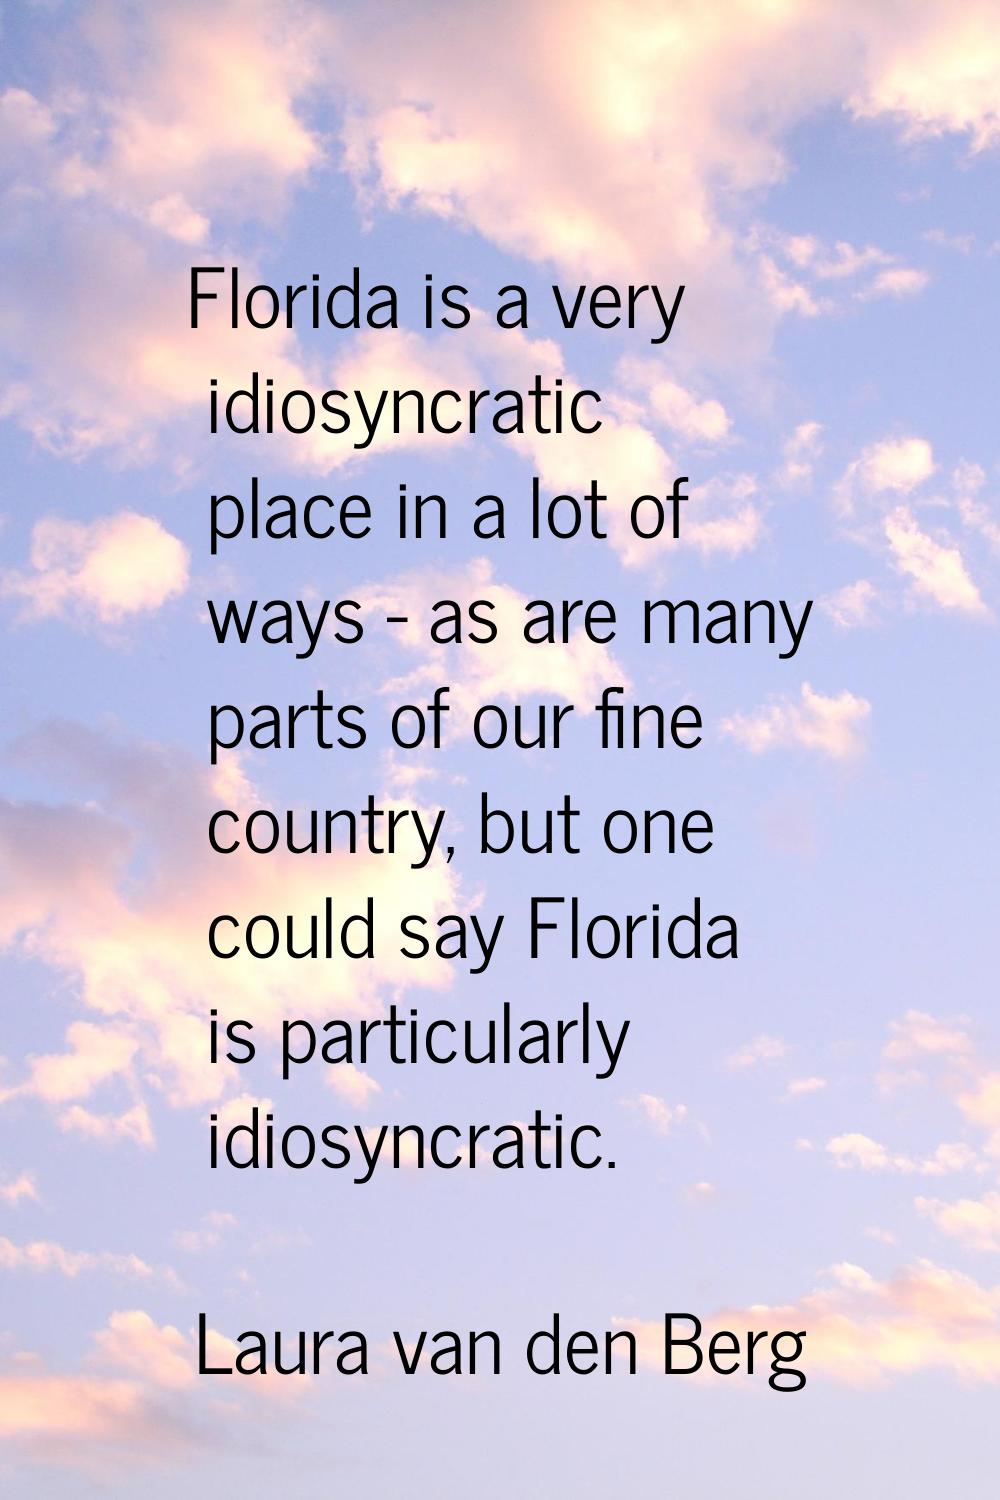 Florida is a very idiosyncratic place in a lot of ways - as are many parts of our fine country, but